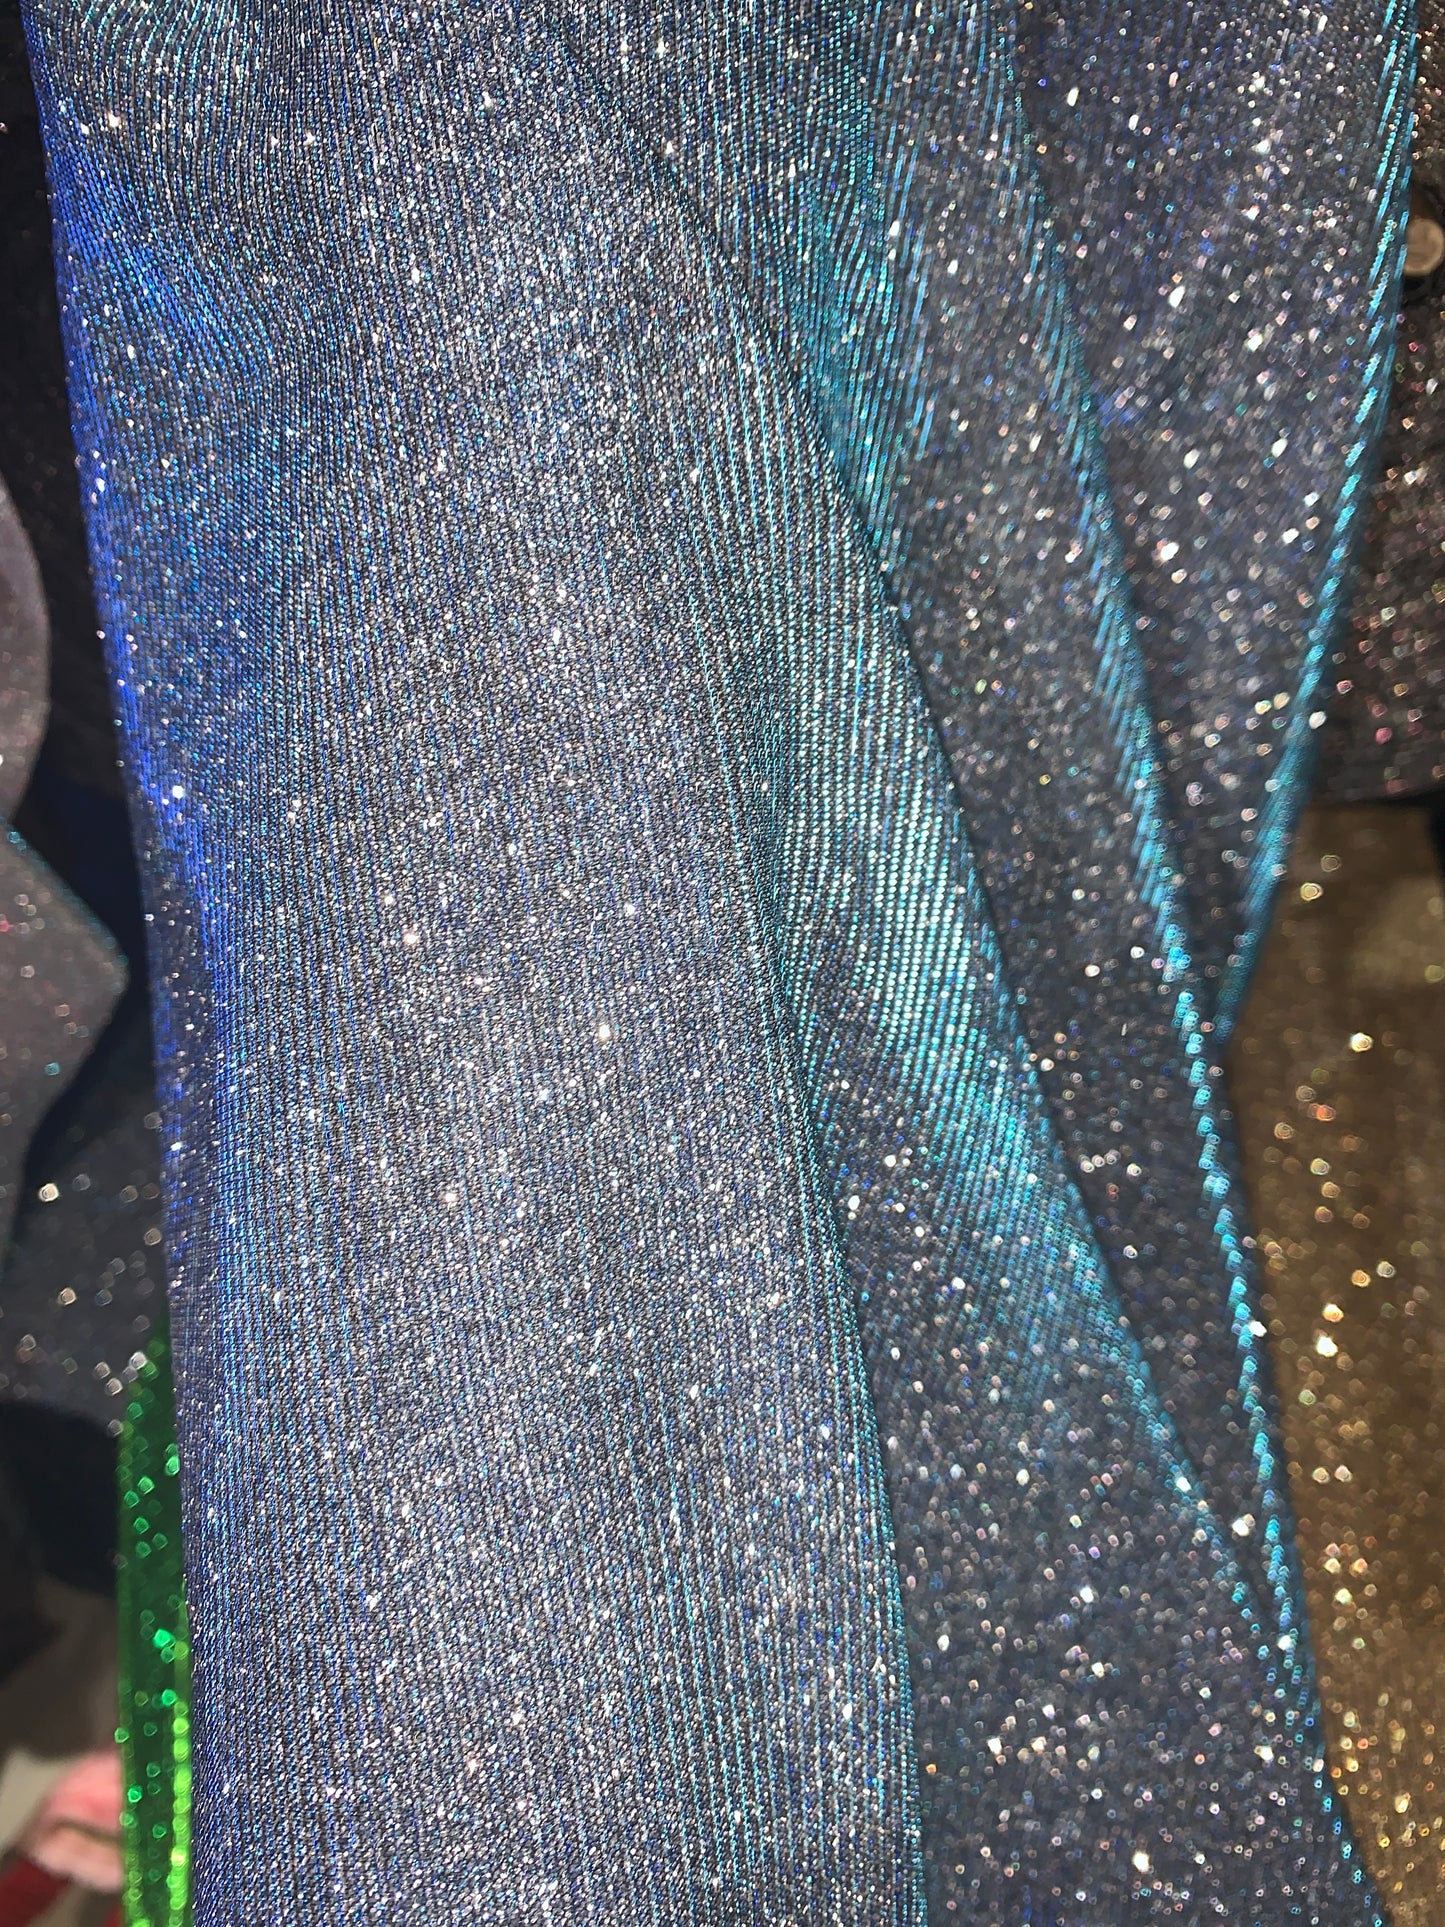 Iridescent Galaxy Gown